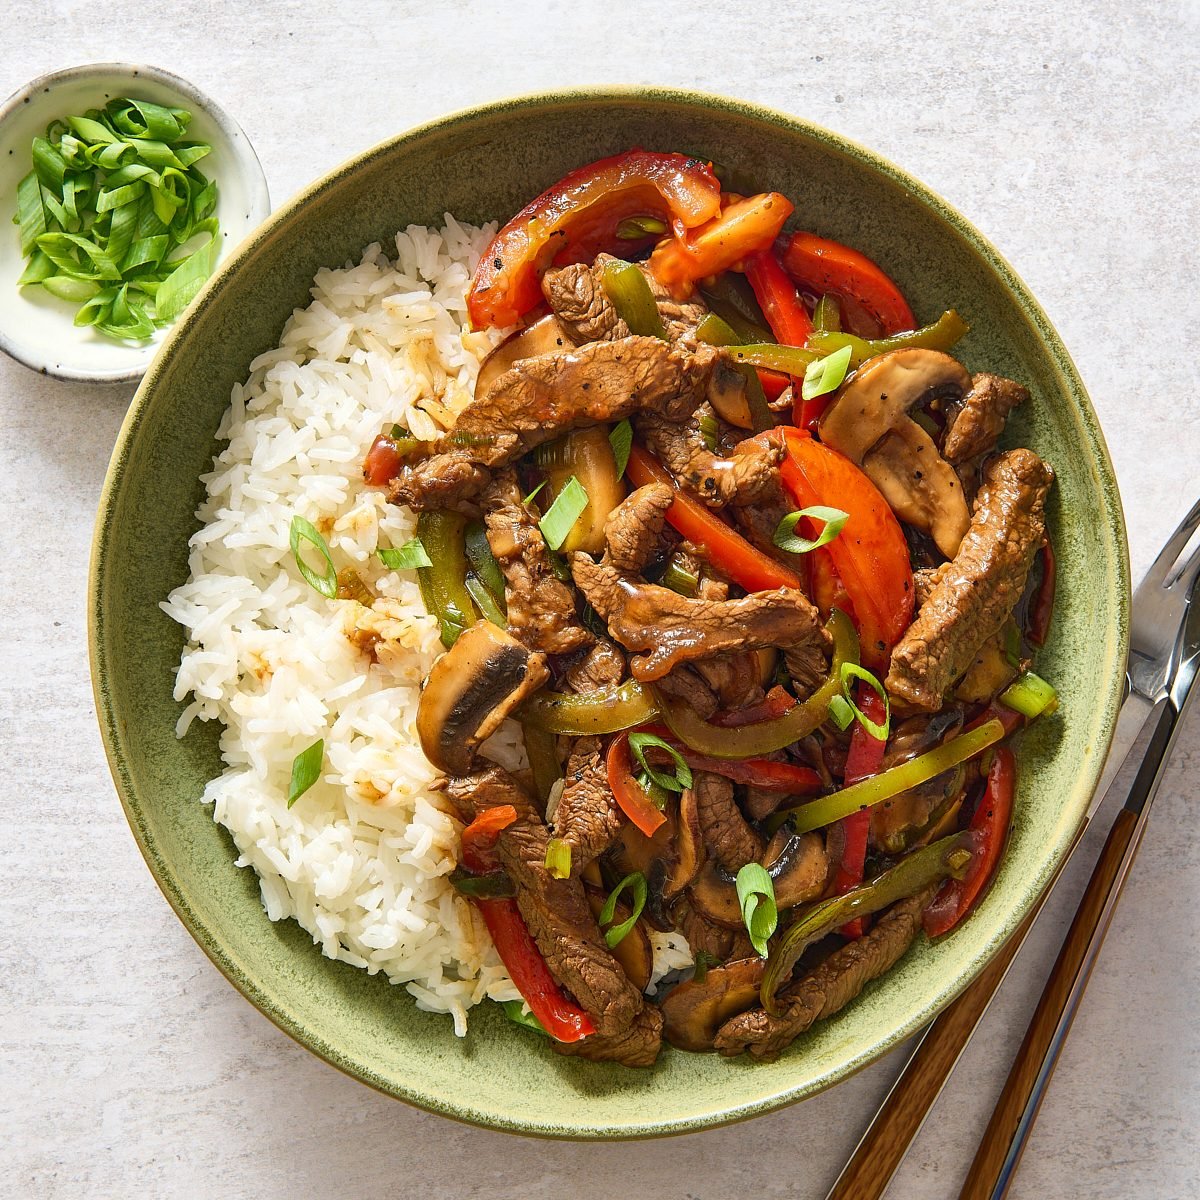 Overhead image of a bowl of Chinese pepper steak with rice